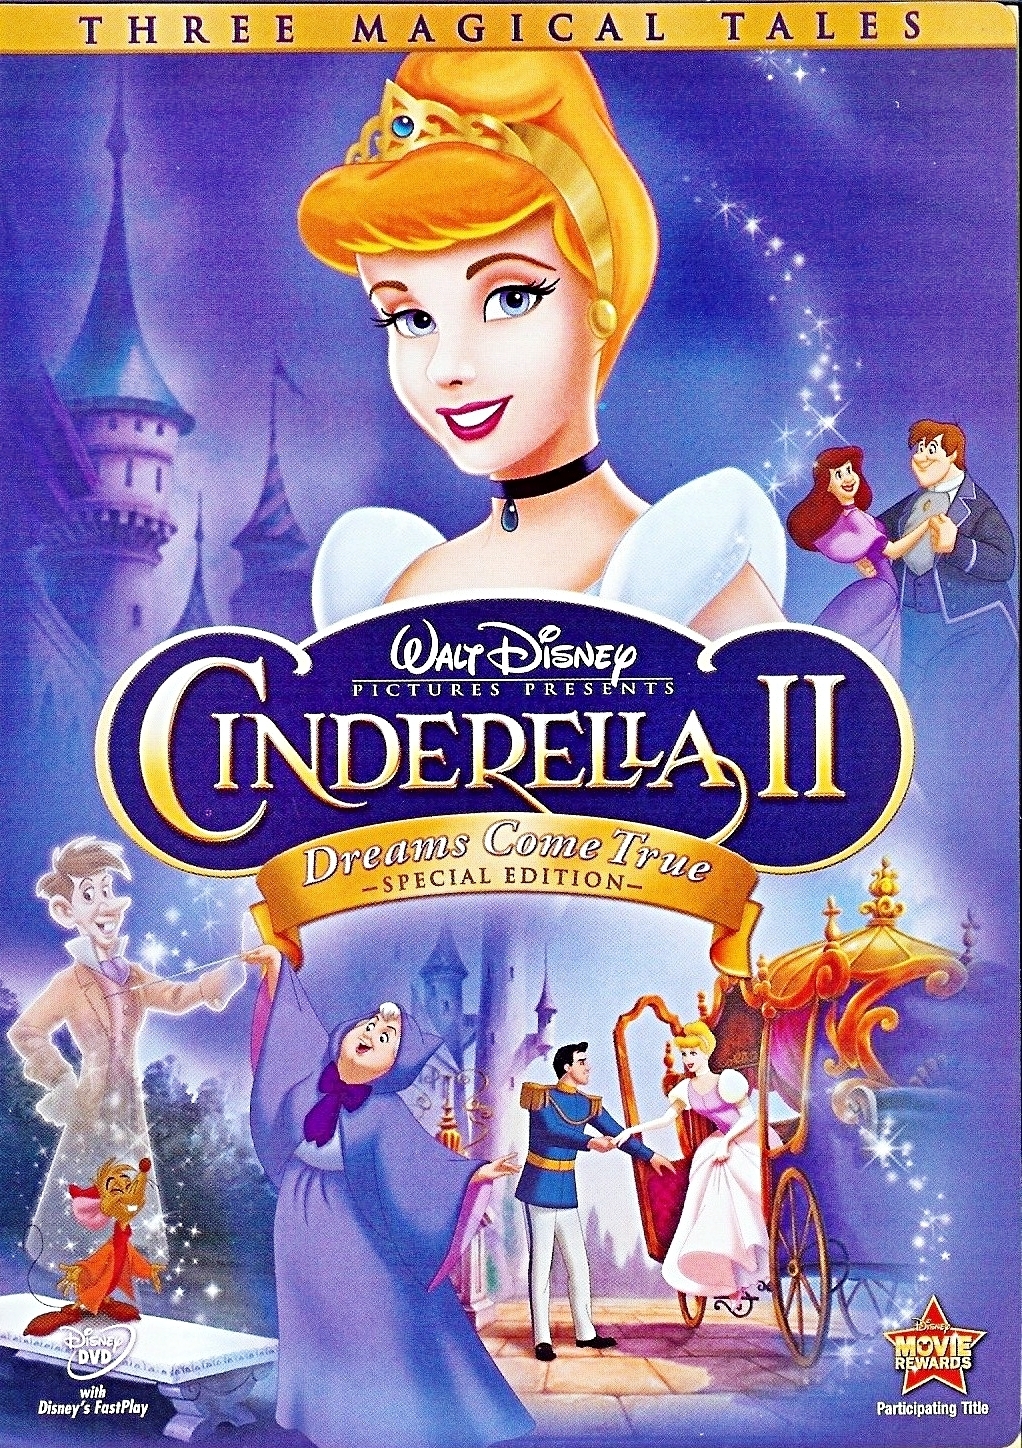 Cinderella II Edition DVD Cover Disney Characters Photo